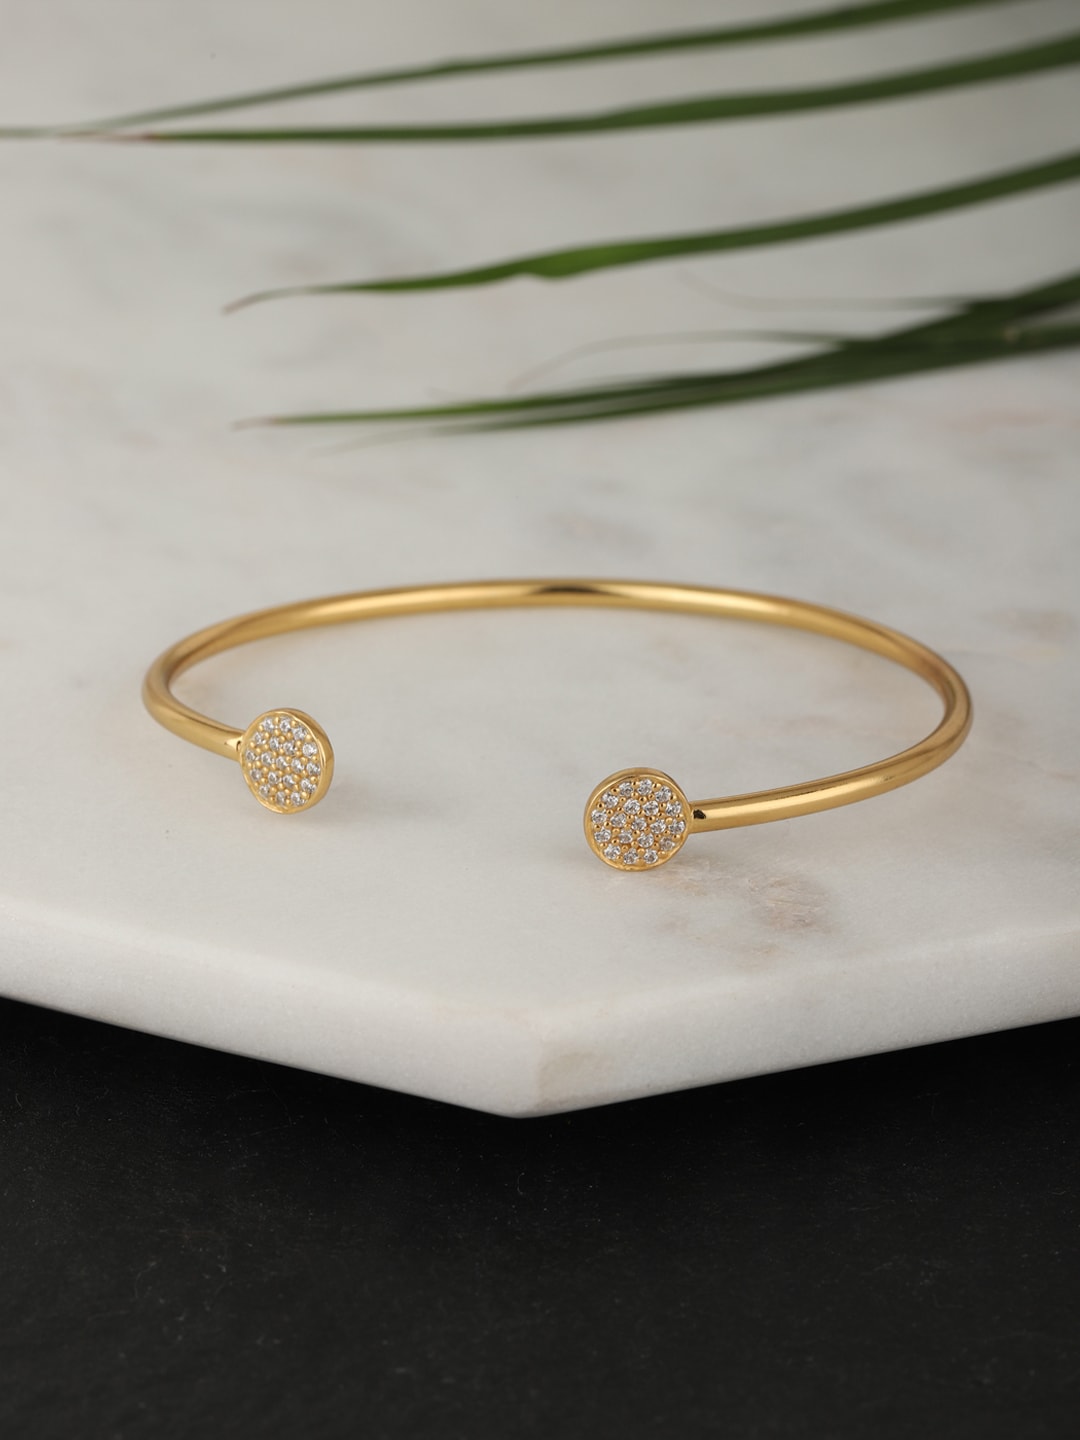 Carlton London Gold-Plated CZ-Studed Cuff Bracelet Price in India